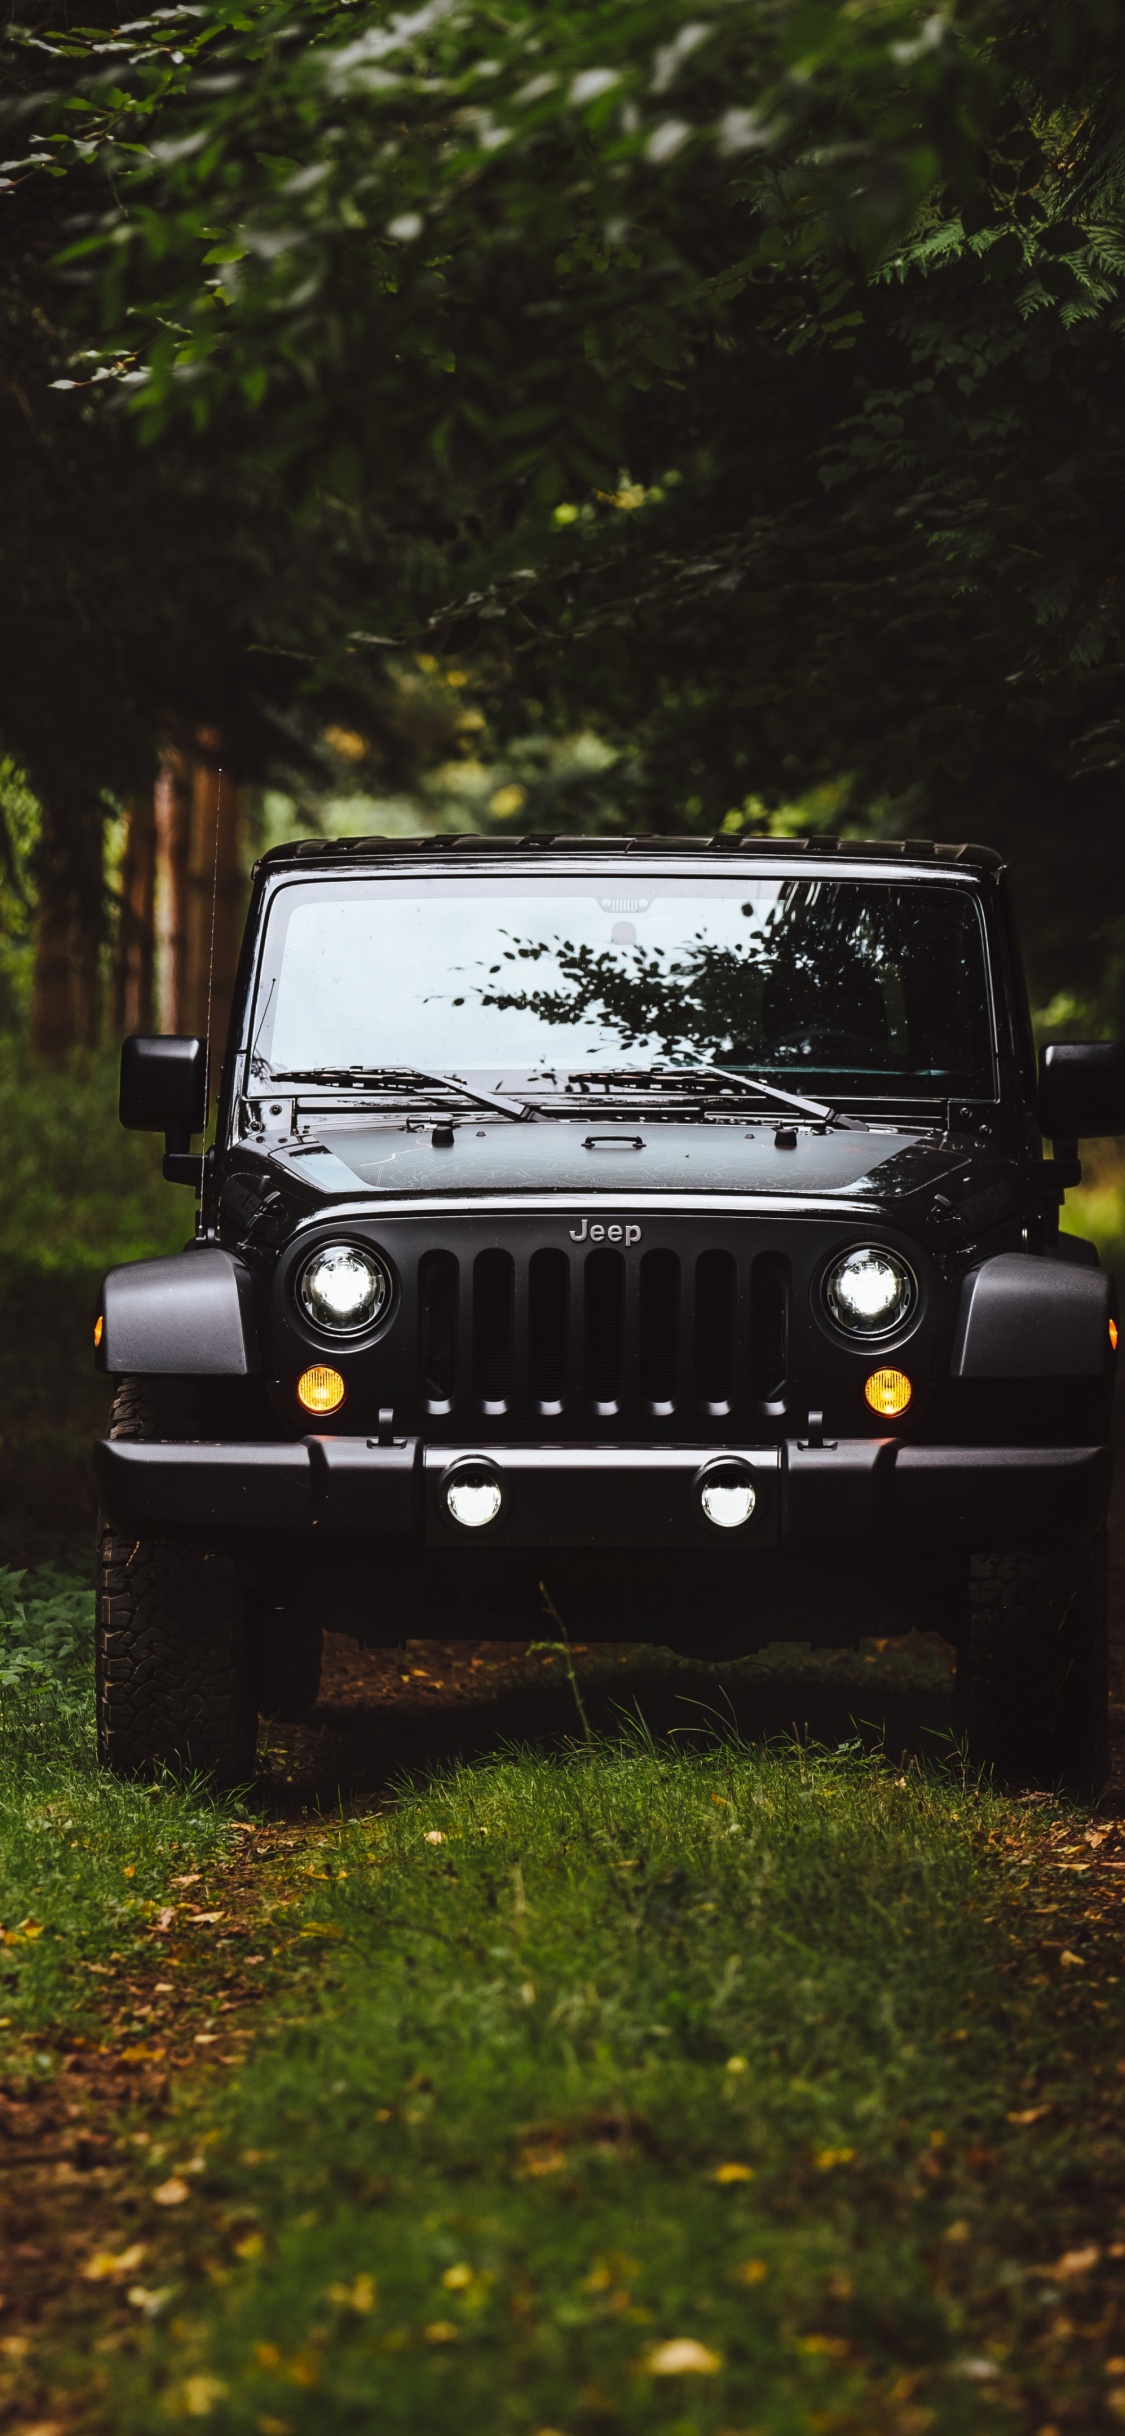 Black Jeep Wrangler on Green Grass Field Surrounded by Green Trees During Daytime. Wallpaper in 1125x2436 Resolution